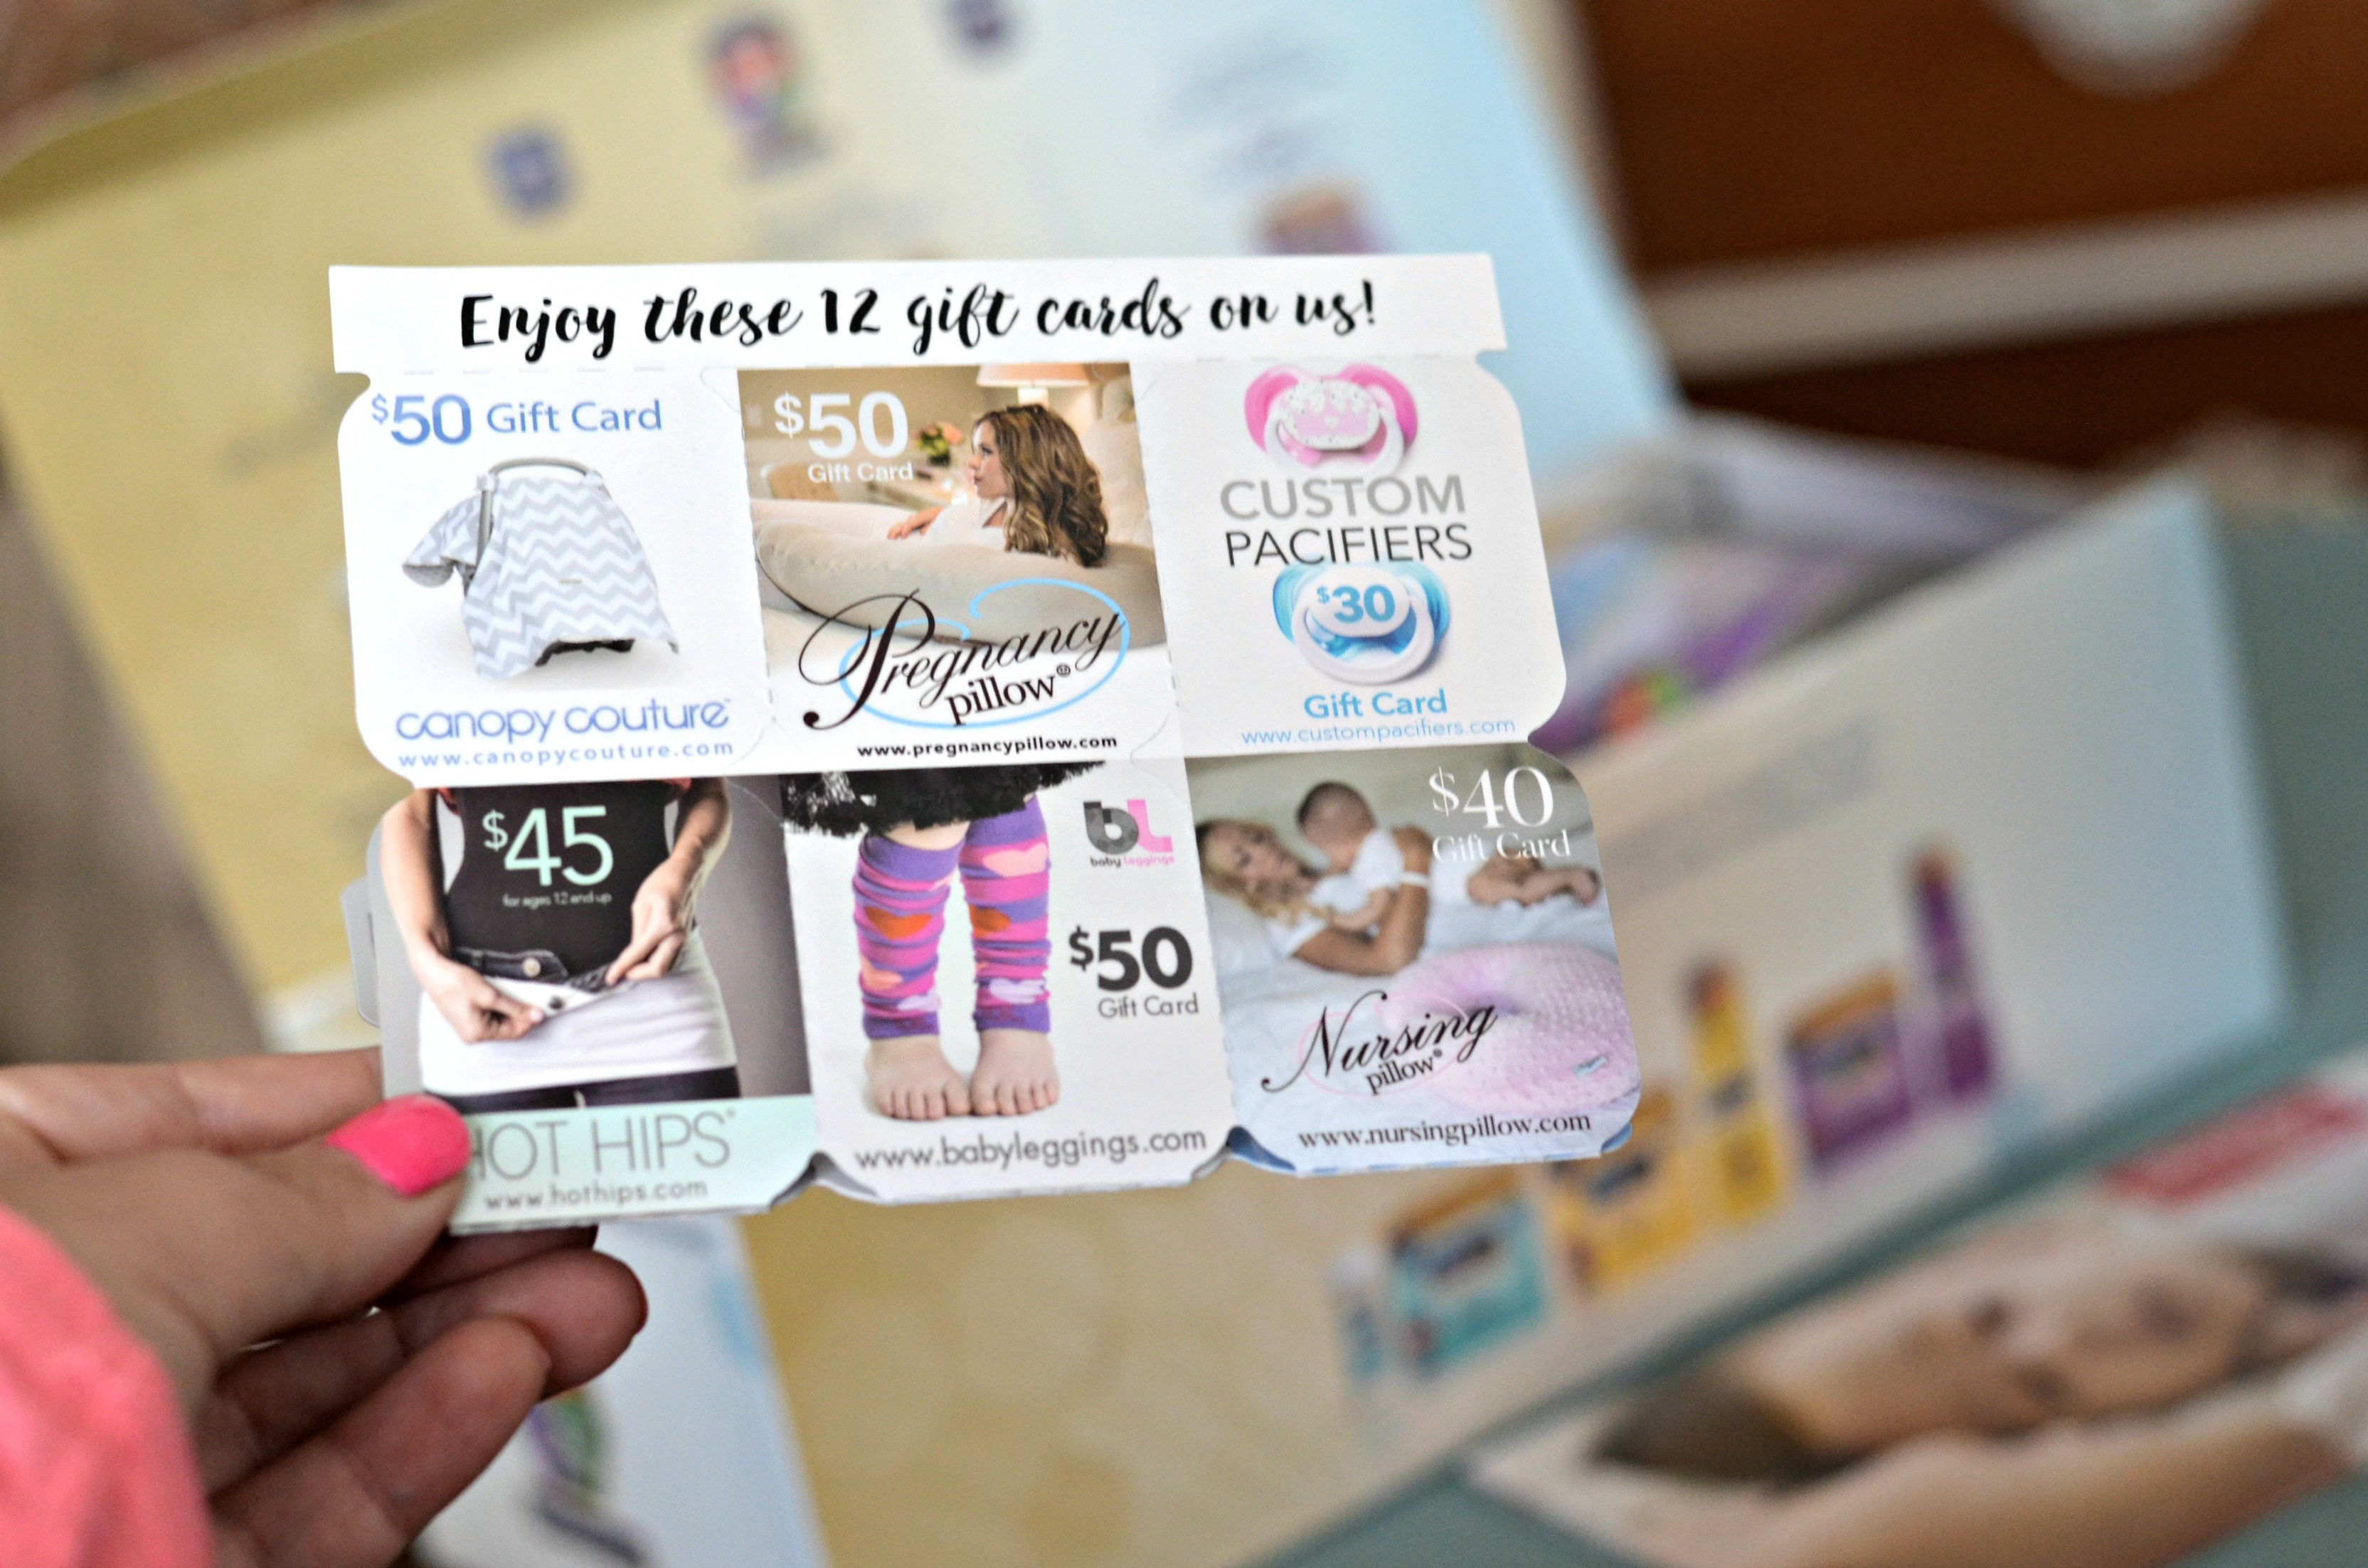 get free enfamil gifts like these Enfamil gift cards